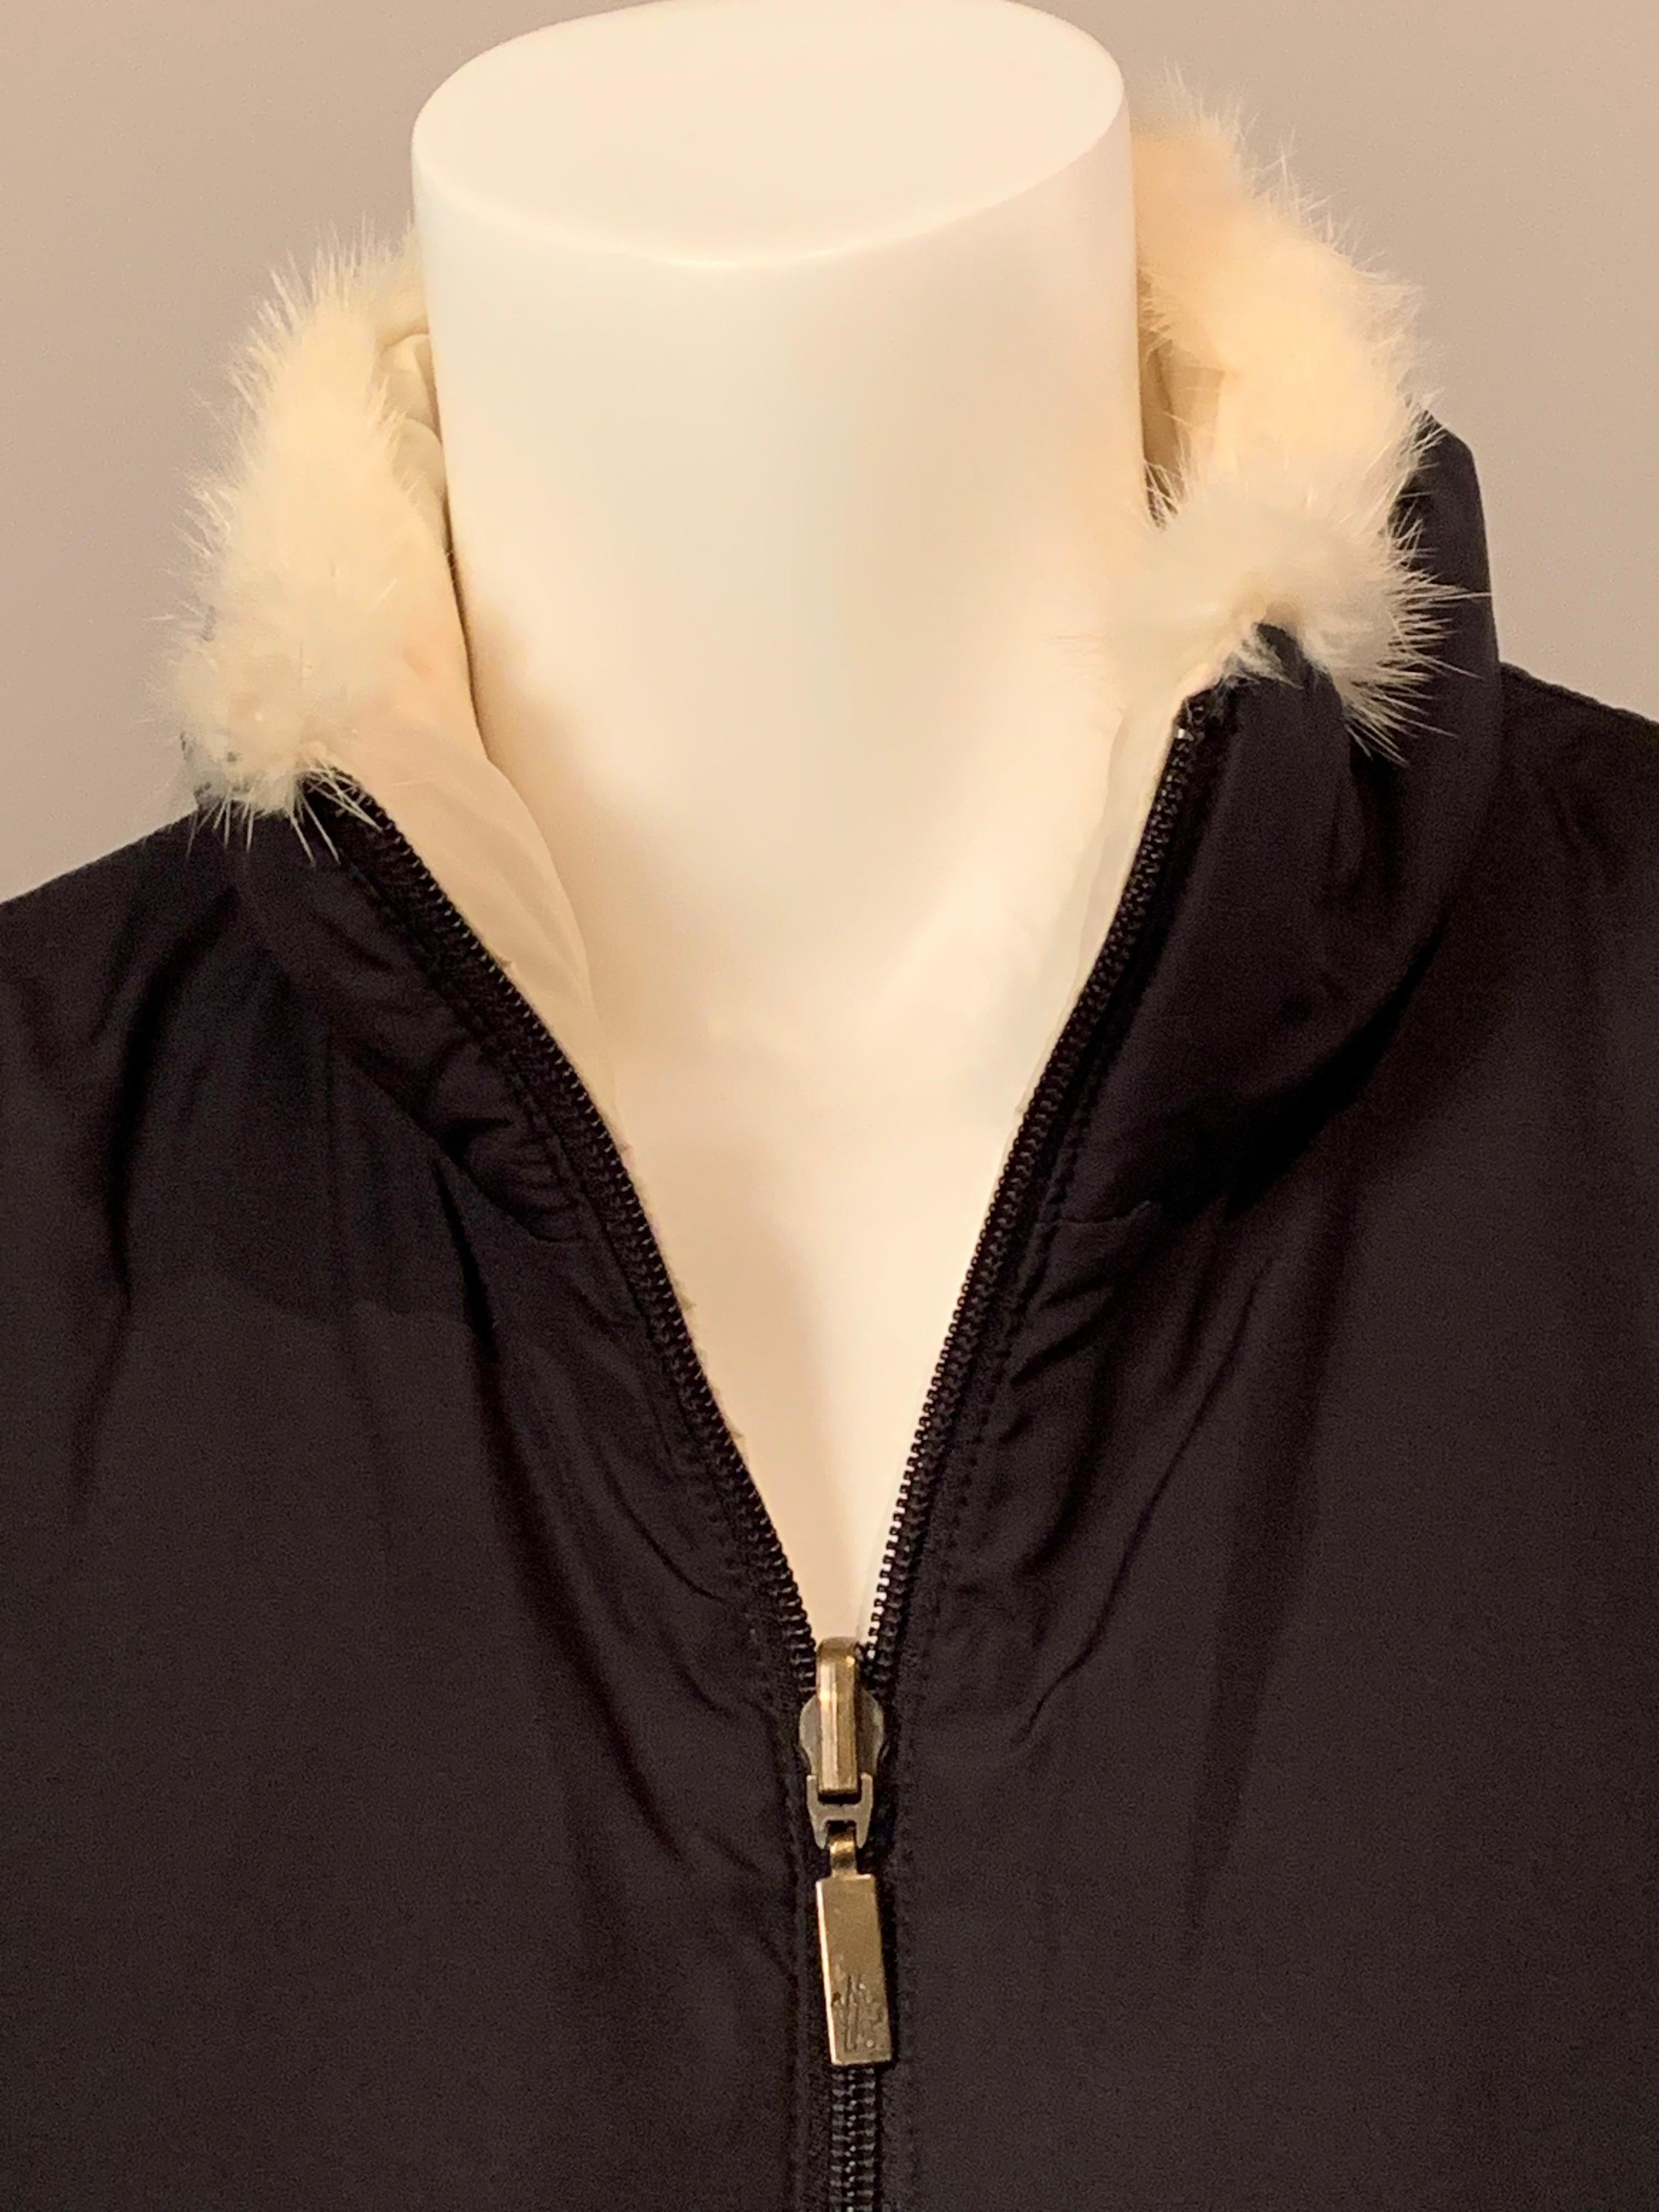 Made in Switzerland by Moncler, this down filled vest has a stand up collar, center front zipper, side pockets with invisible zippers and a small label on the side.  There is a larger label in a pocket.  It is black, reversing to creamy white, with